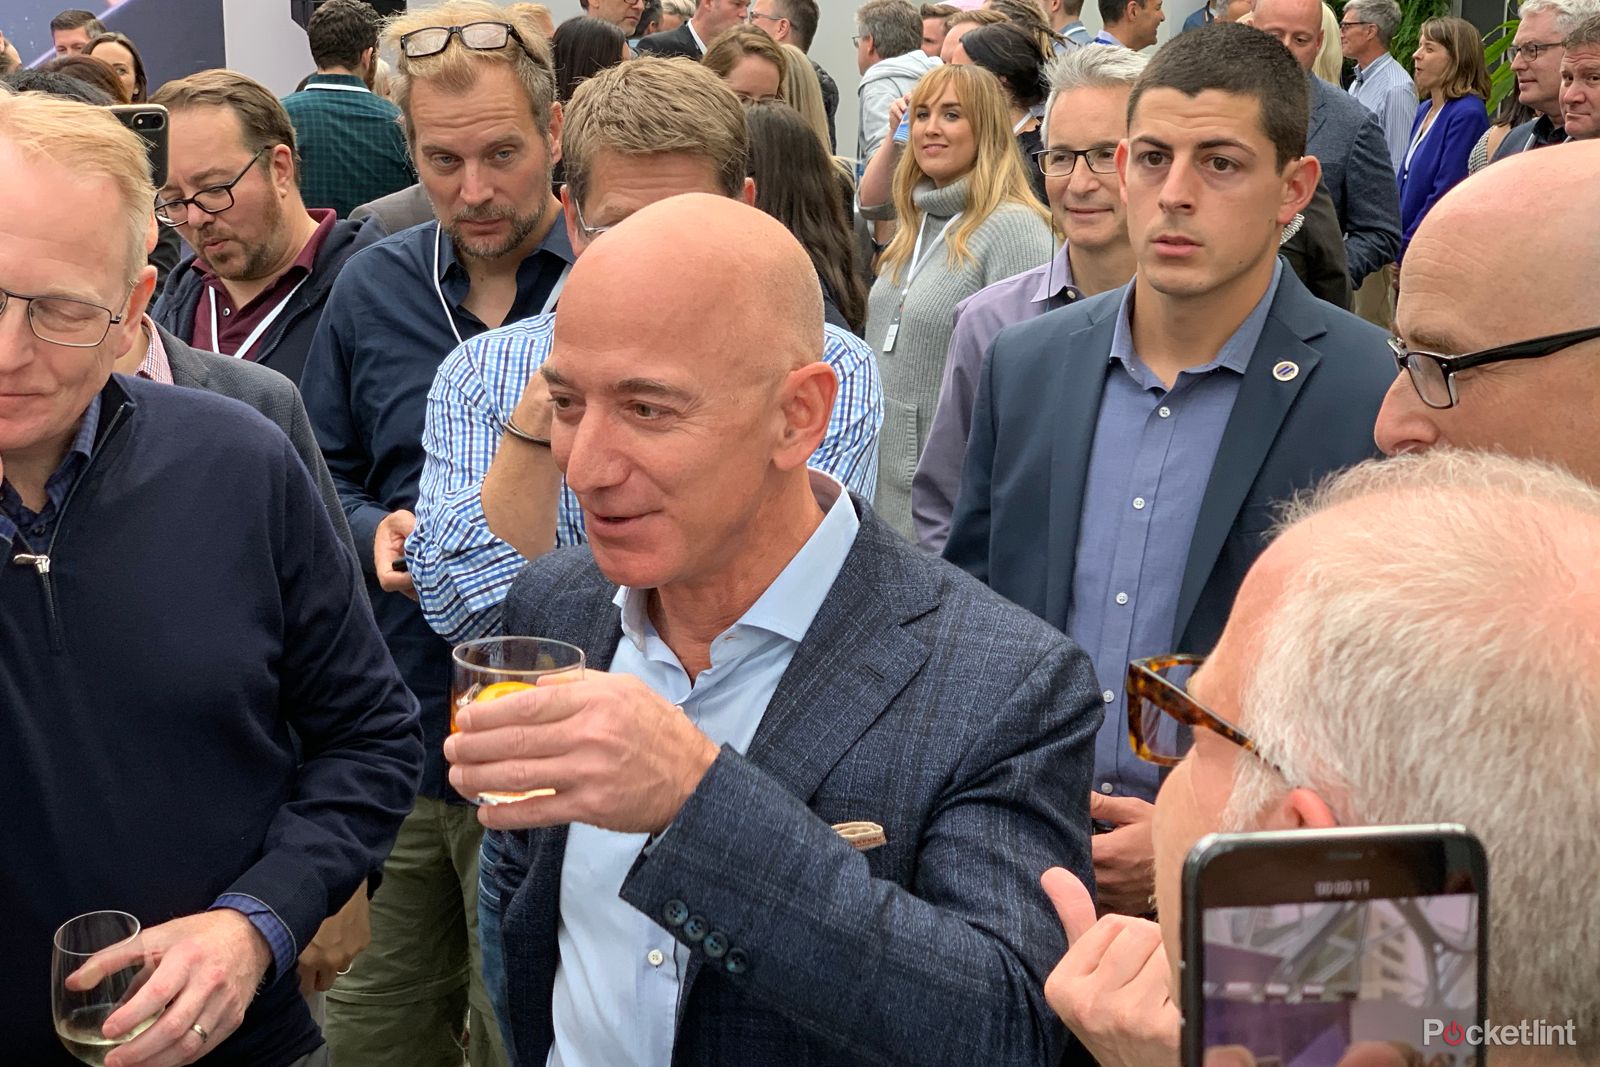 Jeff Bezos appears at Amazon launch - hails Echo Studios prowess says we need facial recognition regulation image 1